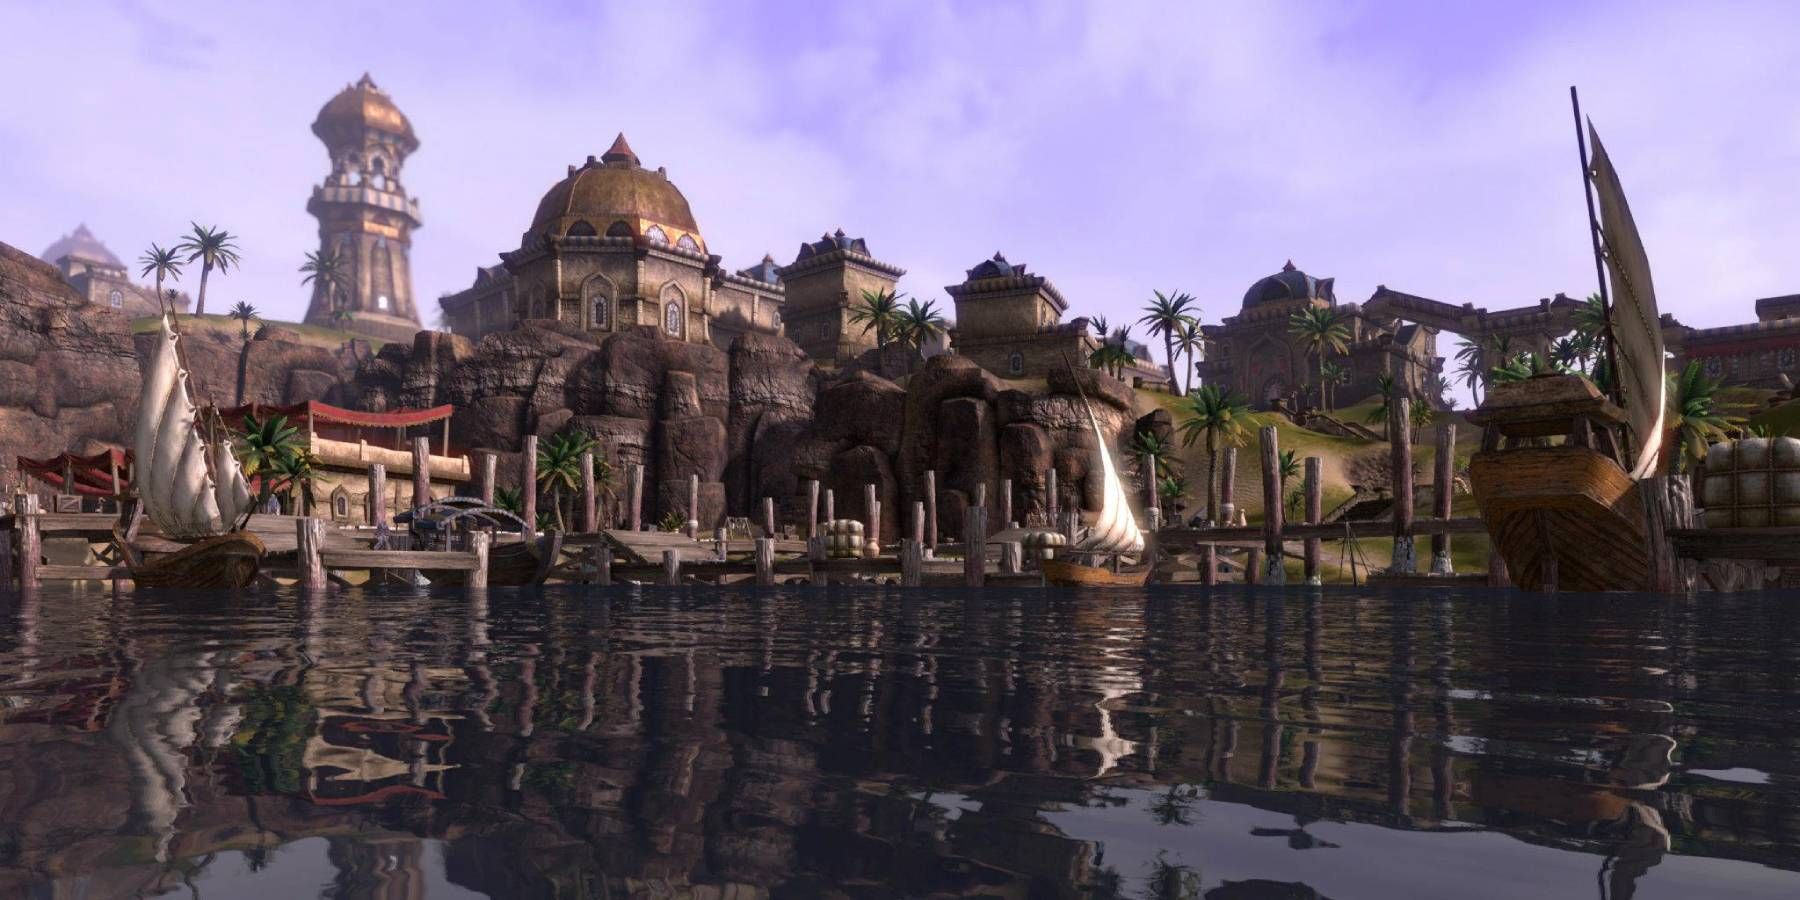 The docks at the city of Sentinel in Hammerfell from The Elder Scrolls